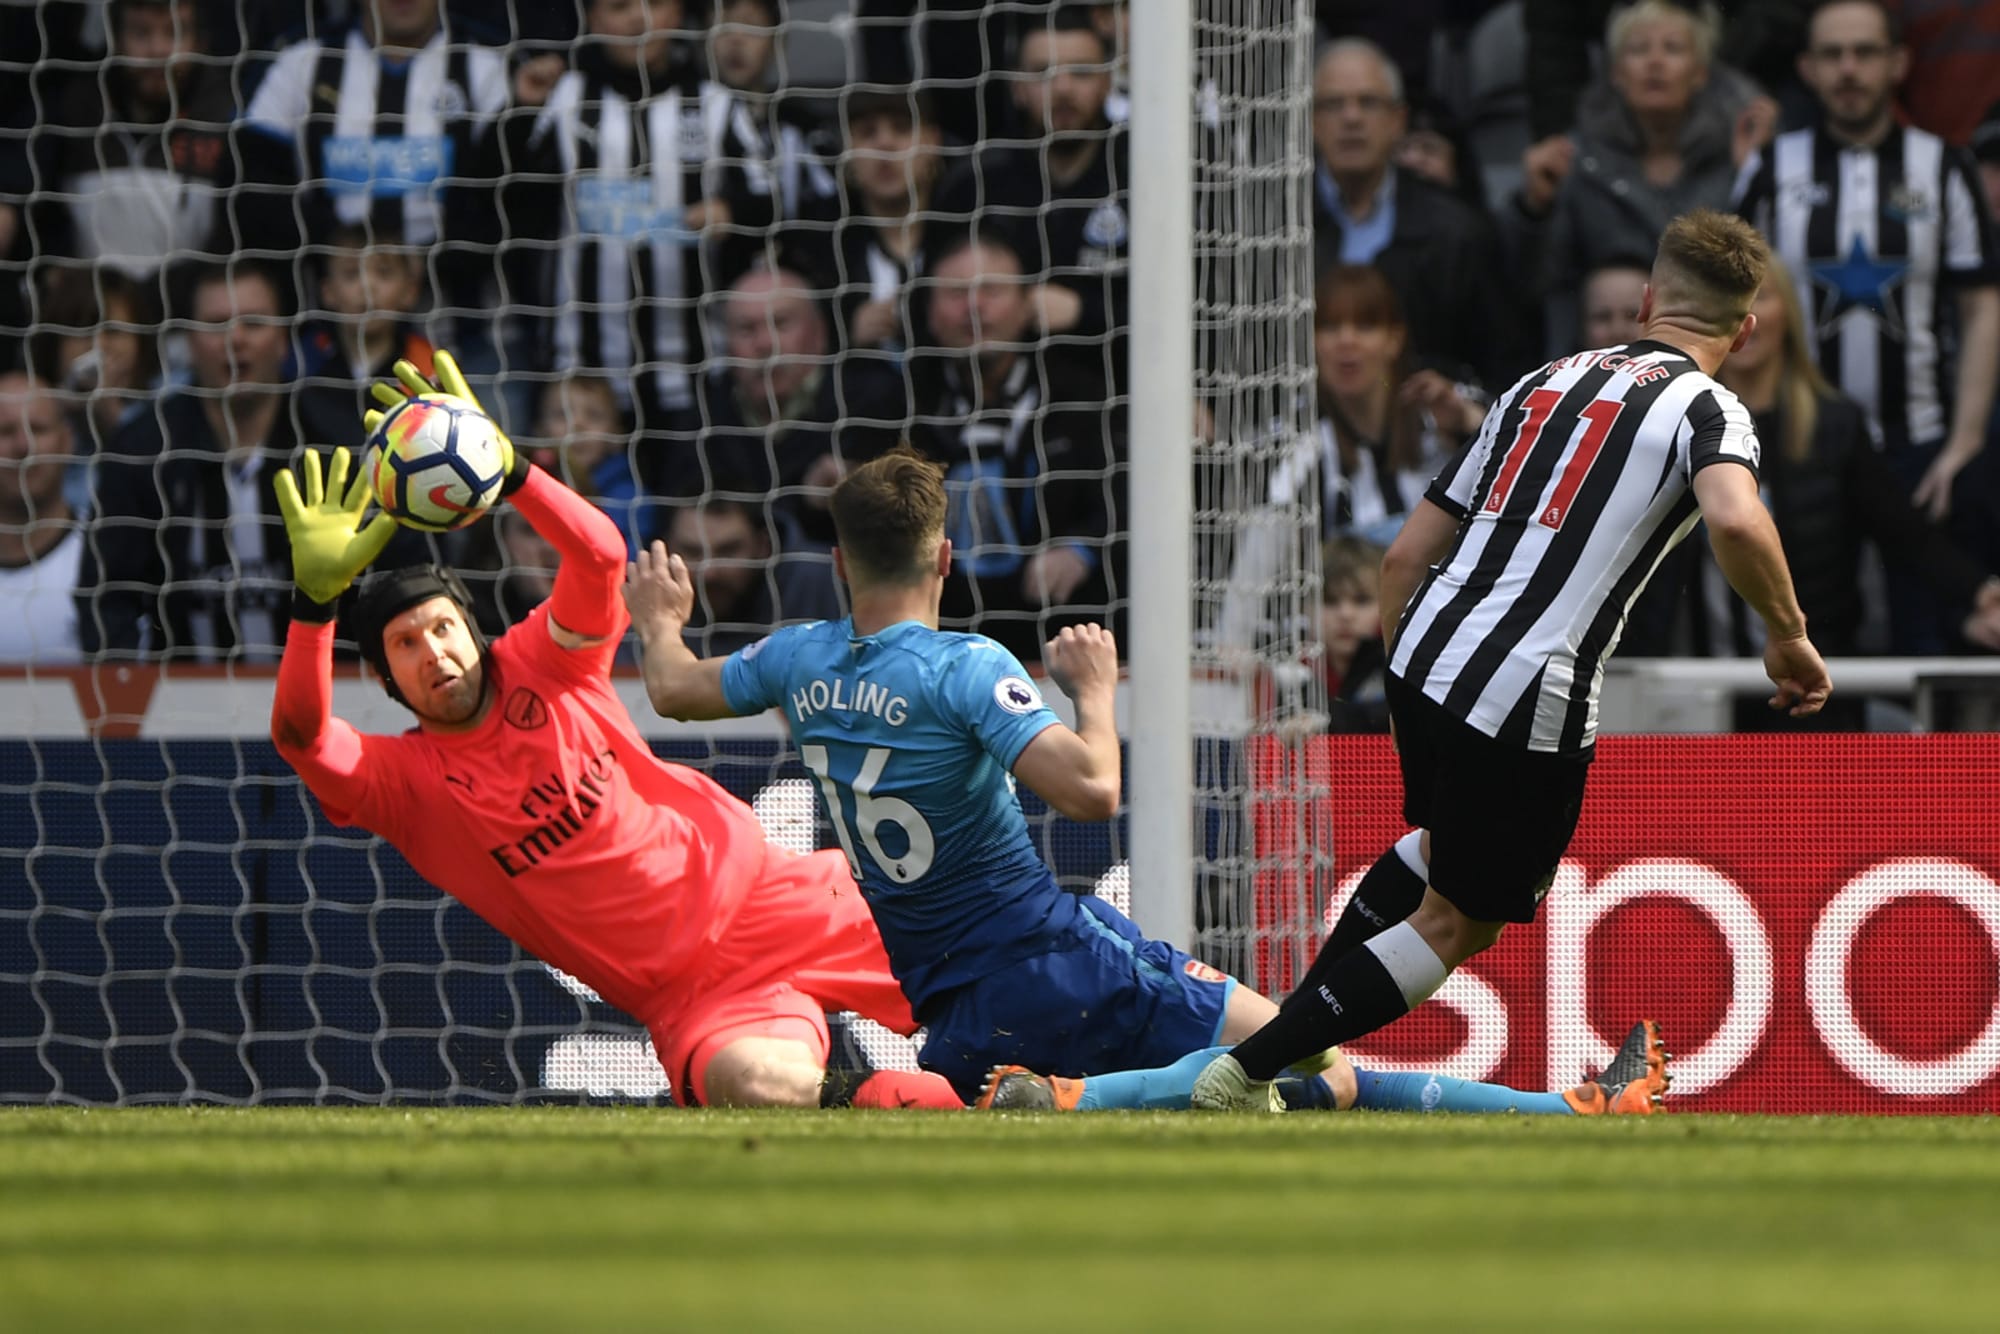 Arsenal Vs Newcastle United Highlights and analysis Away abomination